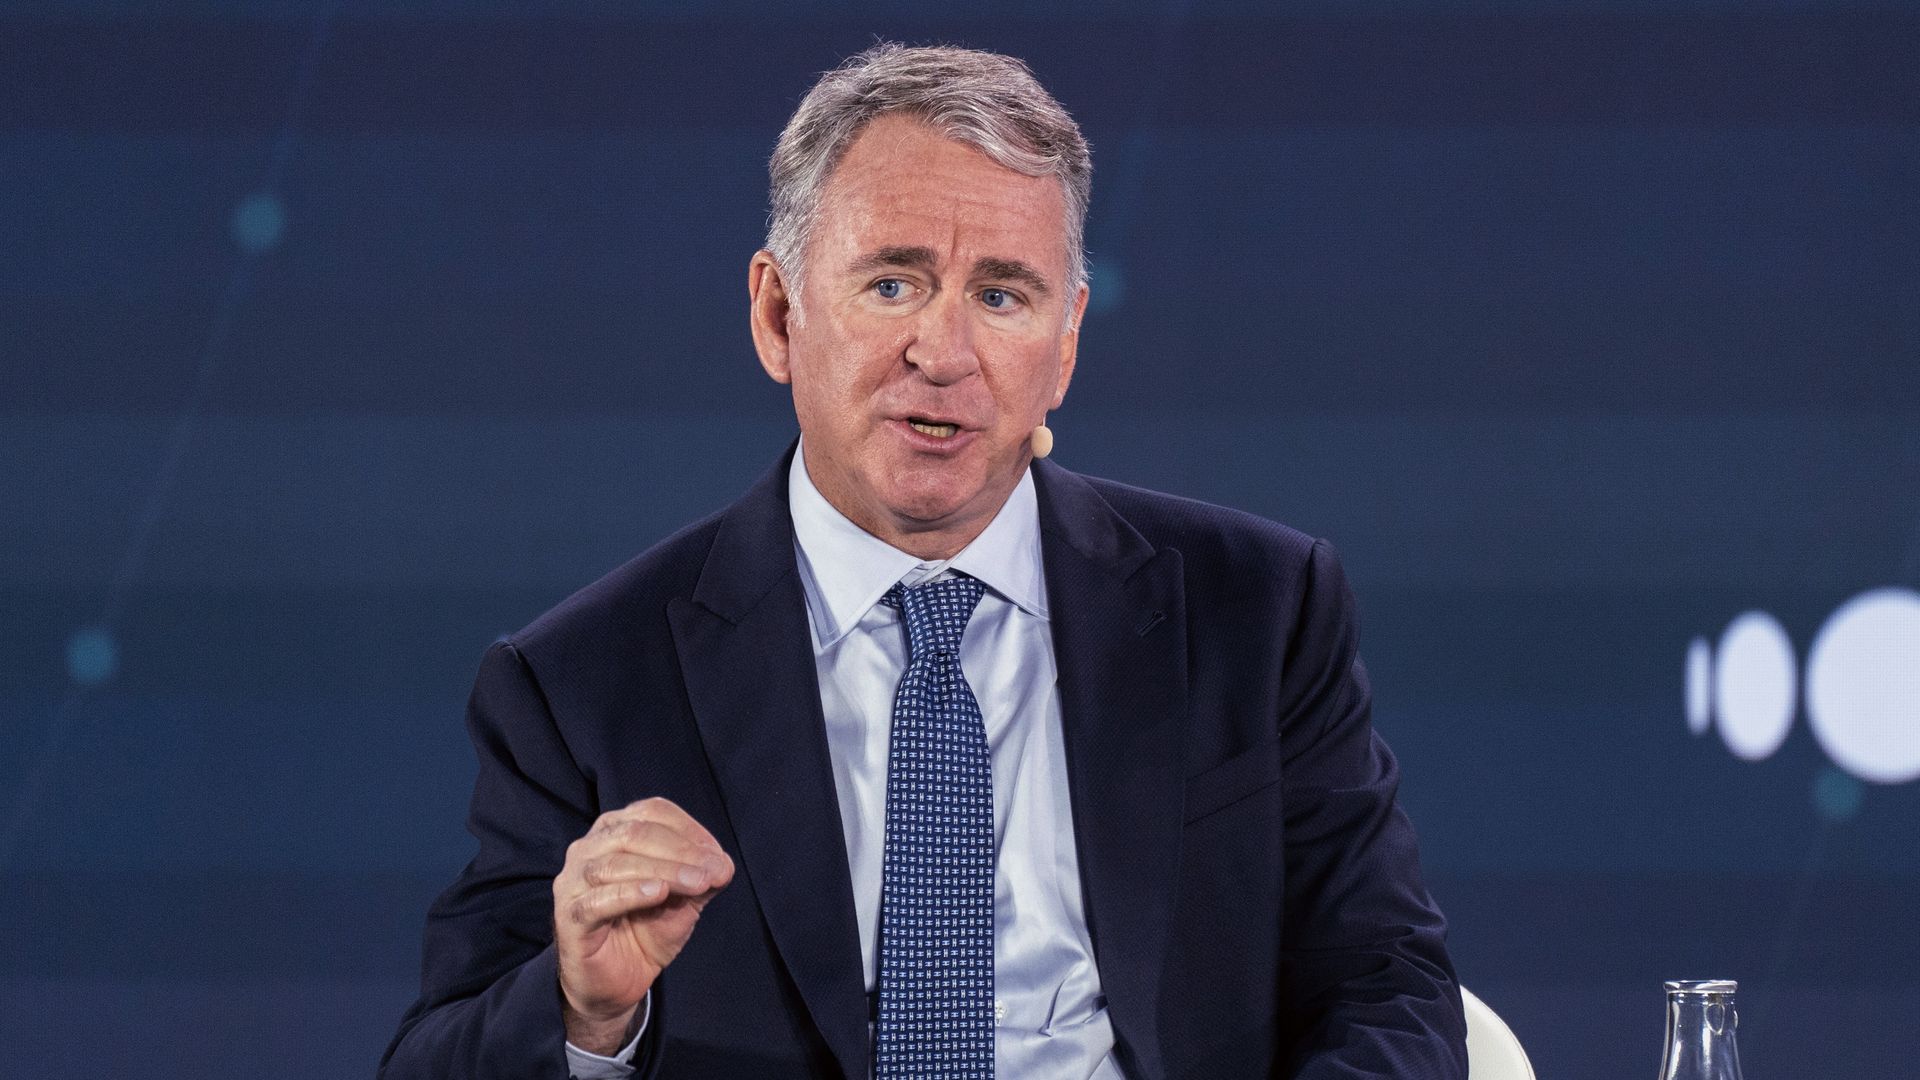 Ken Griffin, chief executive officer and founder of Citadel Advisors LLC., speaks during the Bloomberg New Economy Forum in Singapore, on Tuesday, Nov. 15